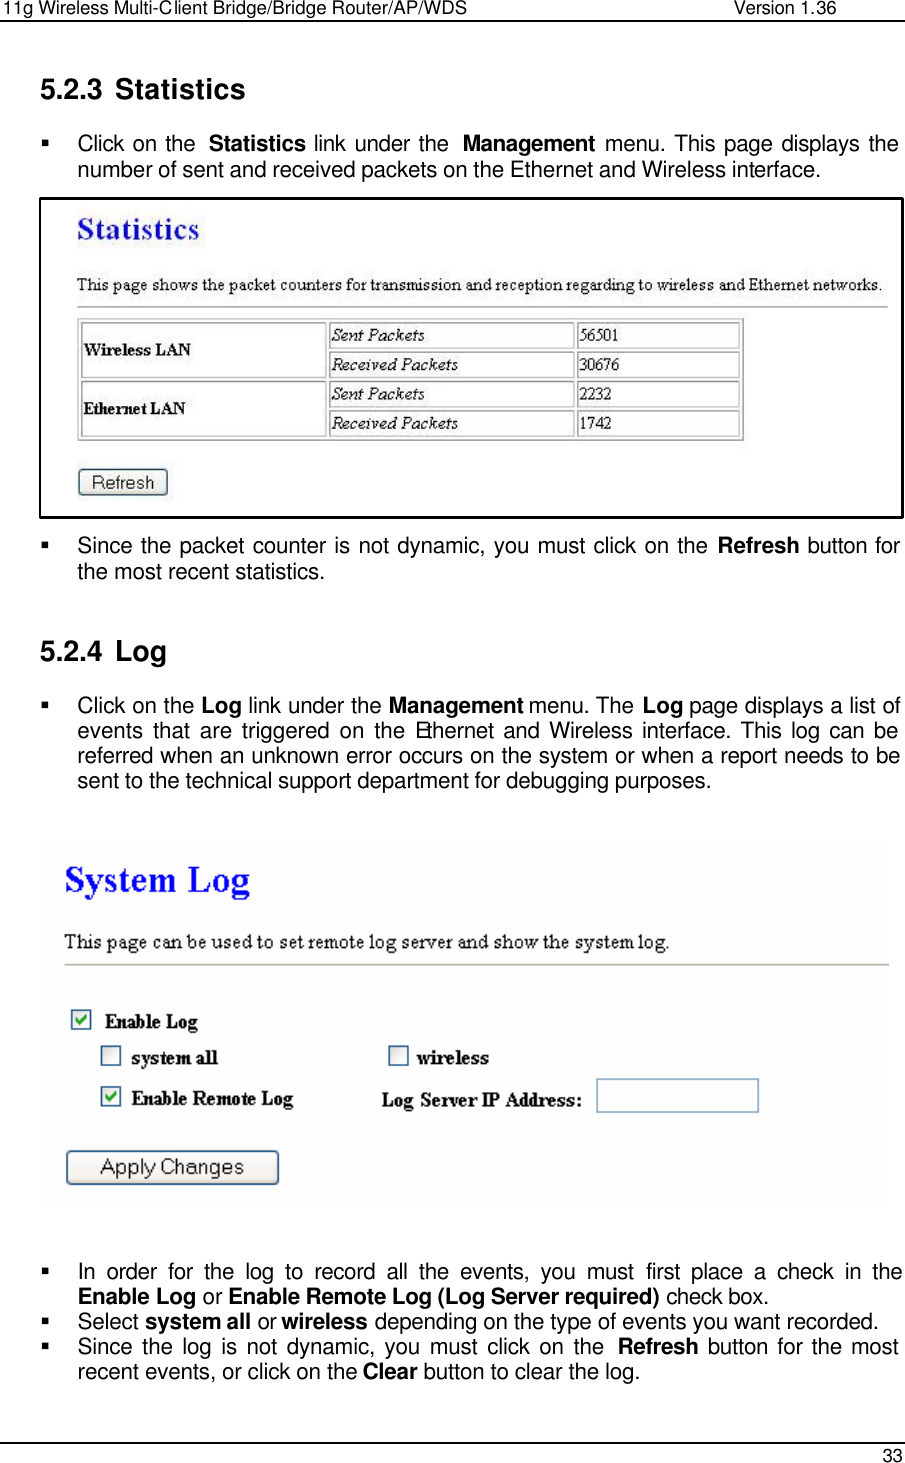 11g Wireless Multi-Client Bridge/Bridge Router/AP/WDS                                                   Version 1.36    33  5.2.3 Statistics § Click on the  Statistics link under the  Management menu. This page displays the number of sent and received packets on the Ethernet and Wireless interface.                § Since the packet counter is not dynamic, you must click on the Refresh button for the most recent statistics.    5.2.4 Log § Click on the Log link under the Management menu. The Log page displays a list of events that are triggered on the Ethernet and Wireless interface. This log can be referred when an unknown error occurs on the system or when a report needs to be sent to the technical support department for debugging purposes.       § In order for the log to record all the events, you must first place a check in the Enable Log or Enable Remote Log (Log Server required) check box. § Select system all or wireless depending on the type of events you want recorded.  § Since the log is not dynamic, you must click on the  Refresh button for the most recent events, or click on the Clear button to clear the log.     